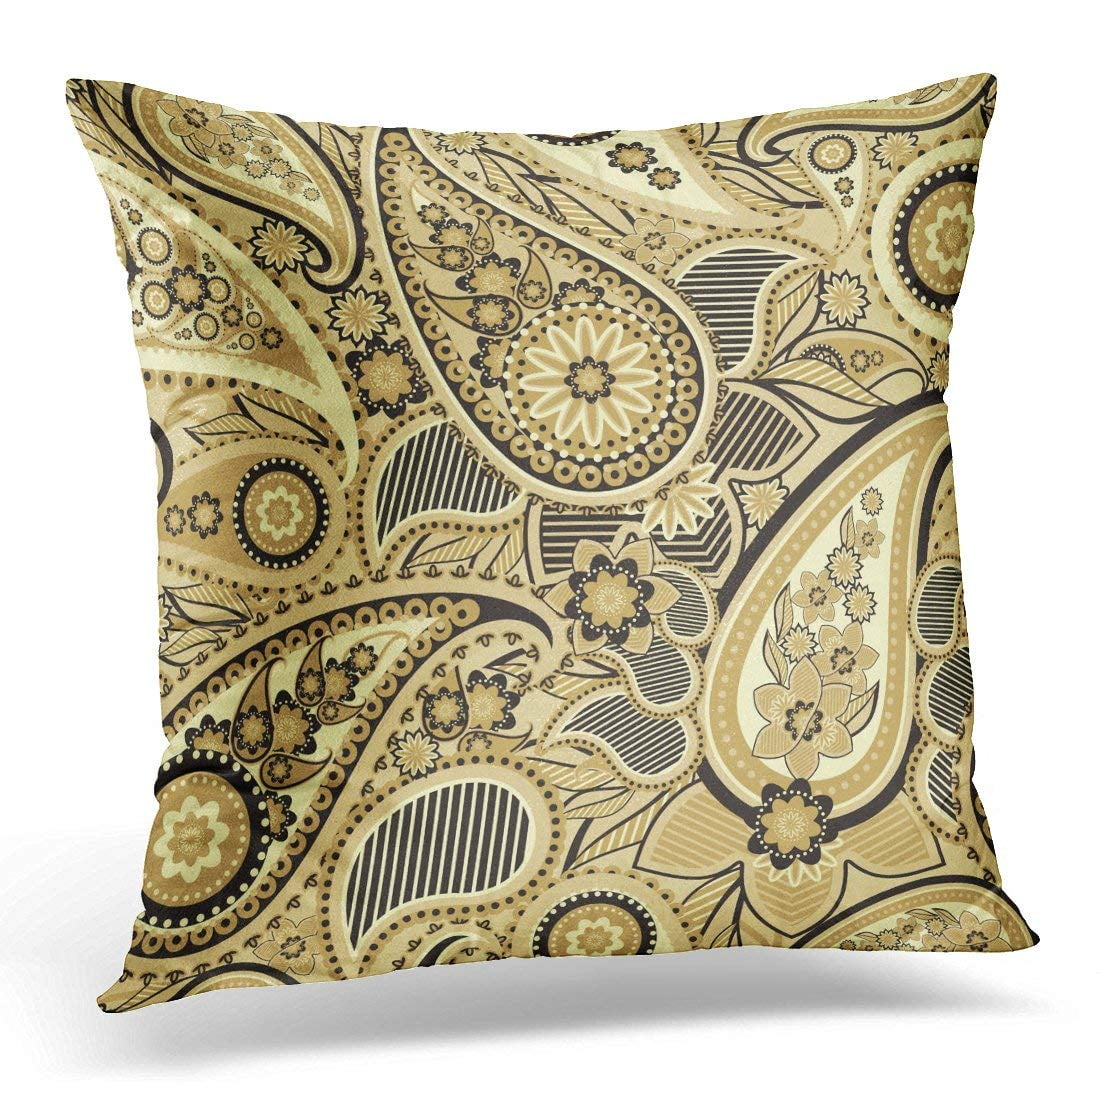 CMFUN Brown Gold Based on Traditional Asian Paisley Associated Pillow Case Pillow Cover 20x20